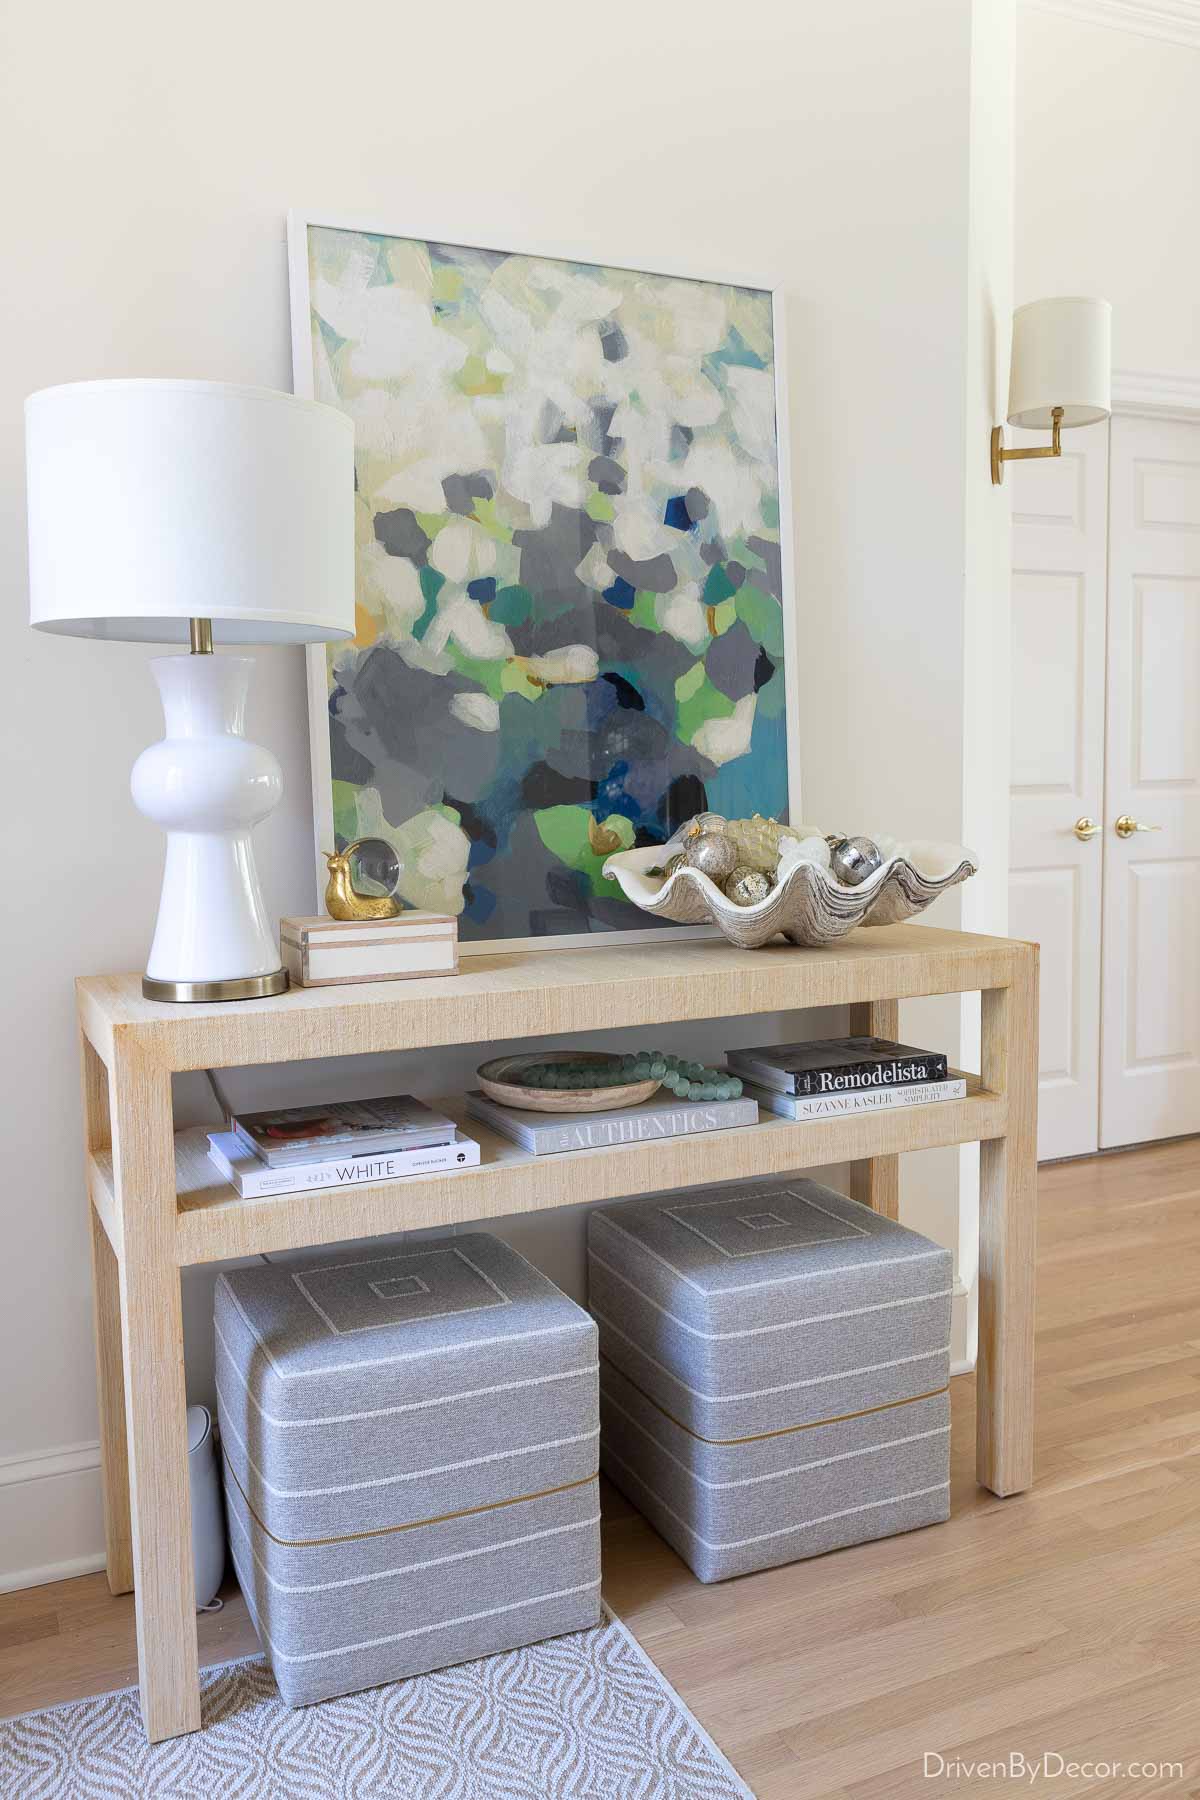 Our entryway console with decorative giant clamshell